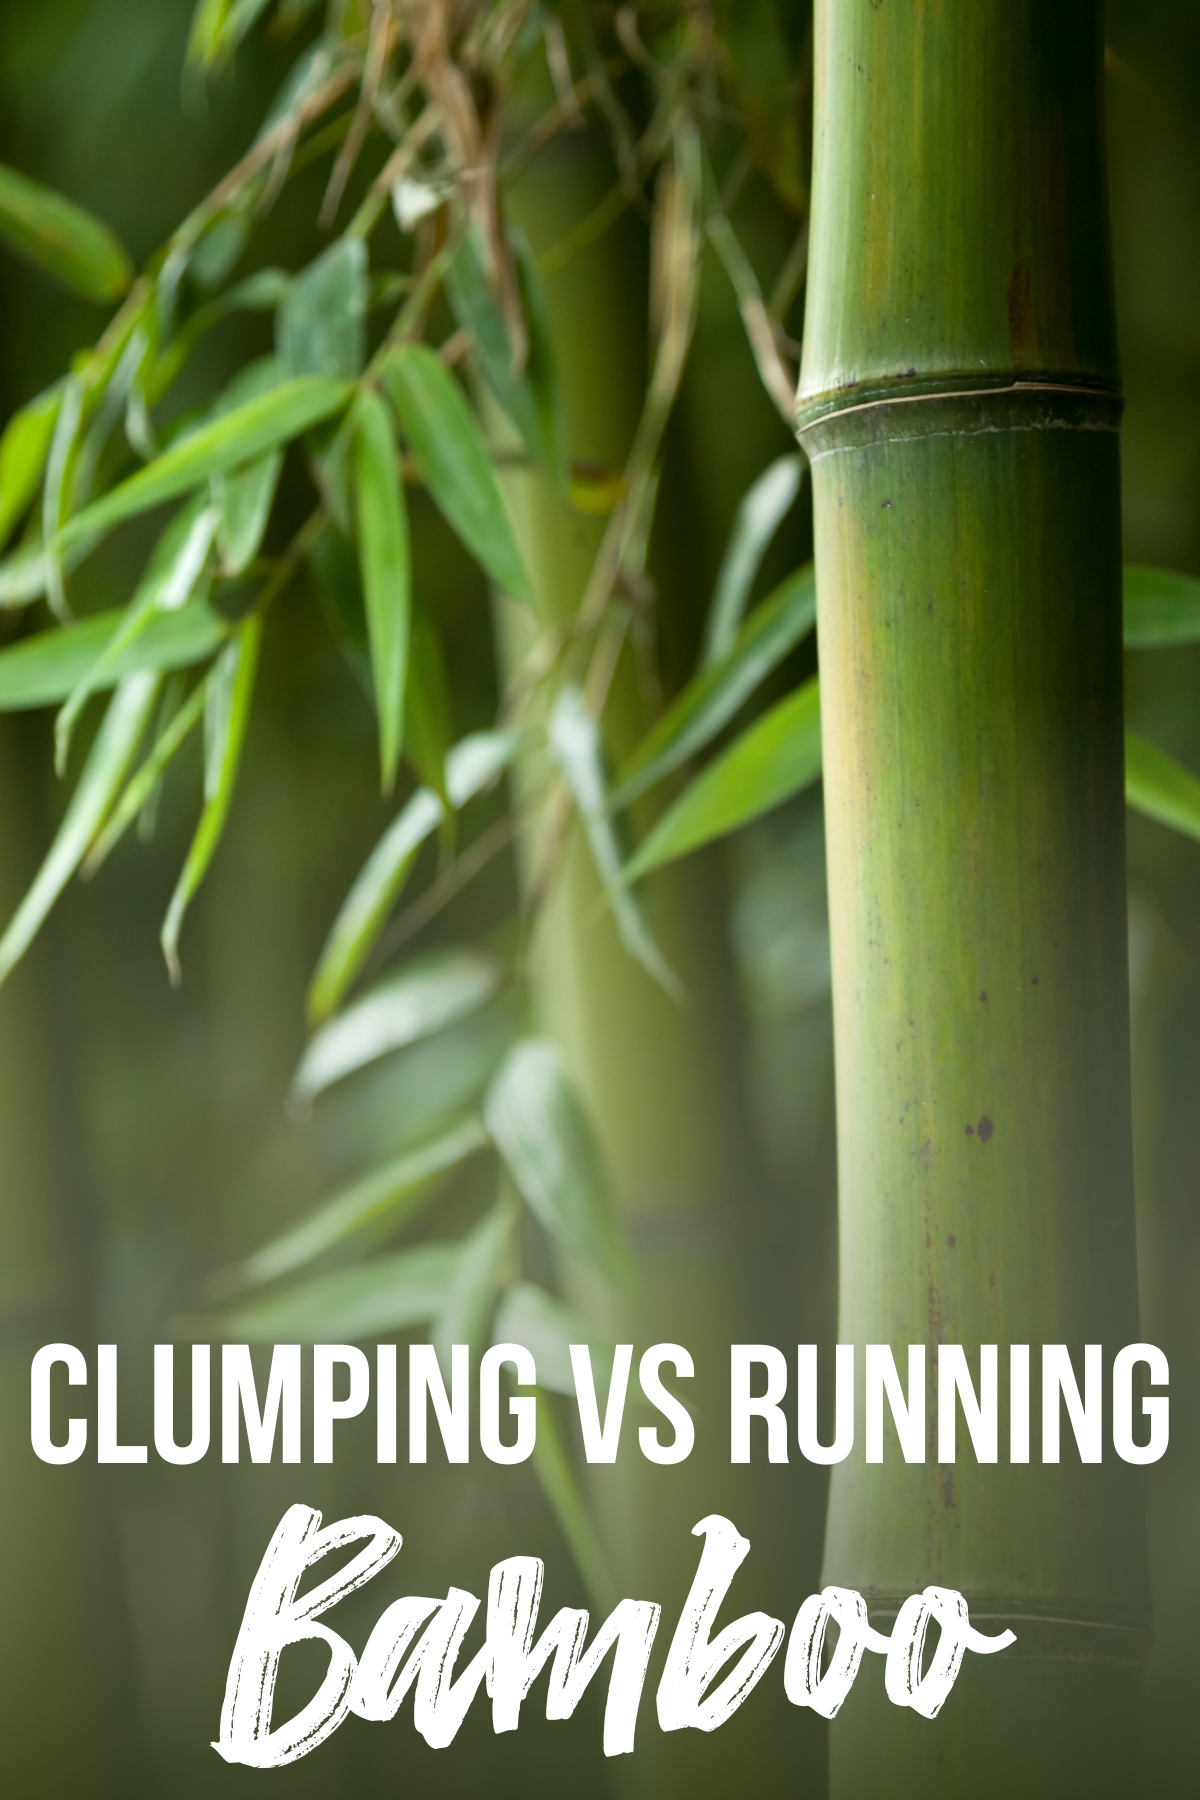 clumping vs running bamboo with text overlay